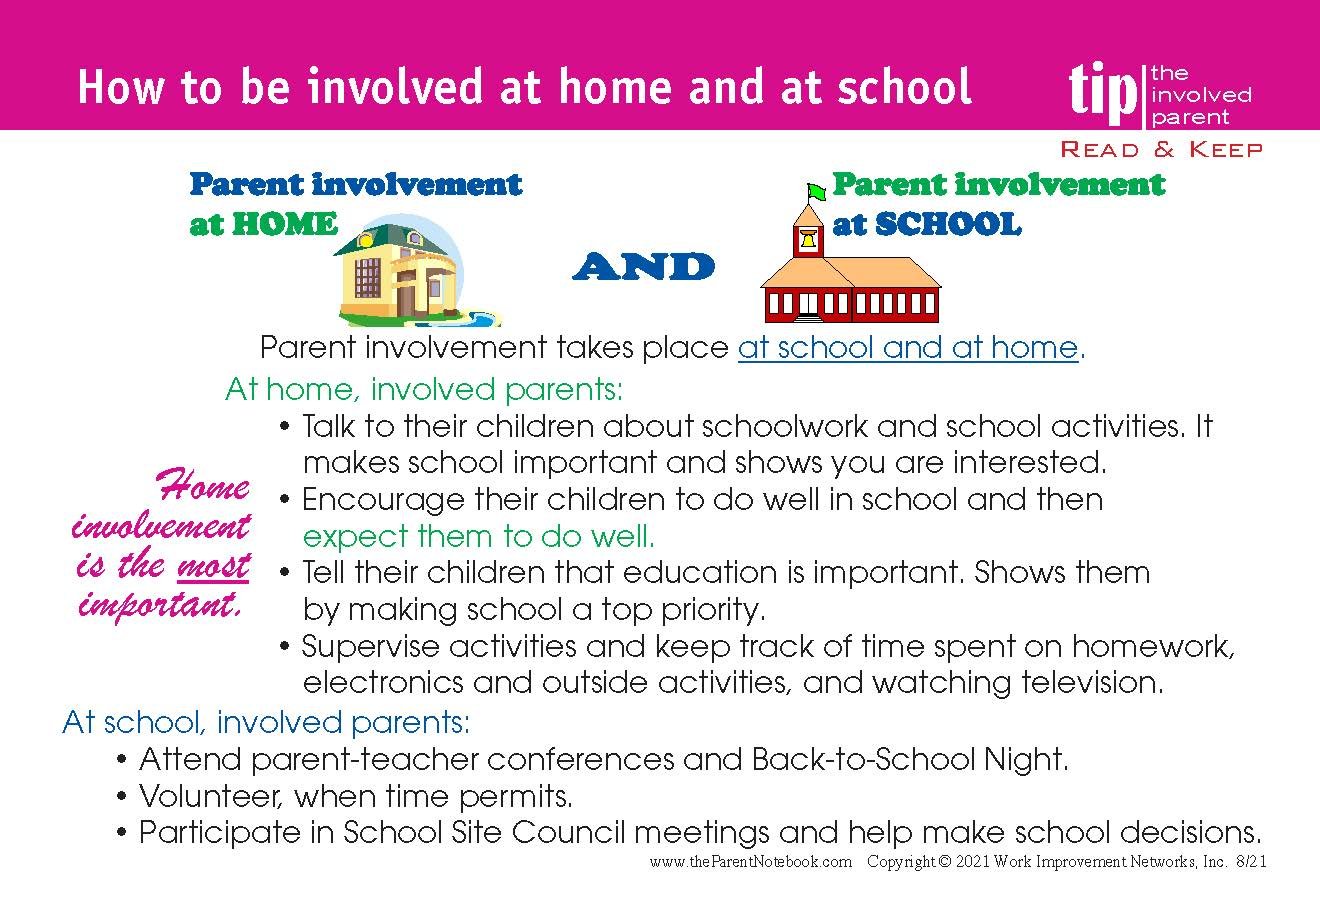 ES11How to be involved at home and at school.jpg